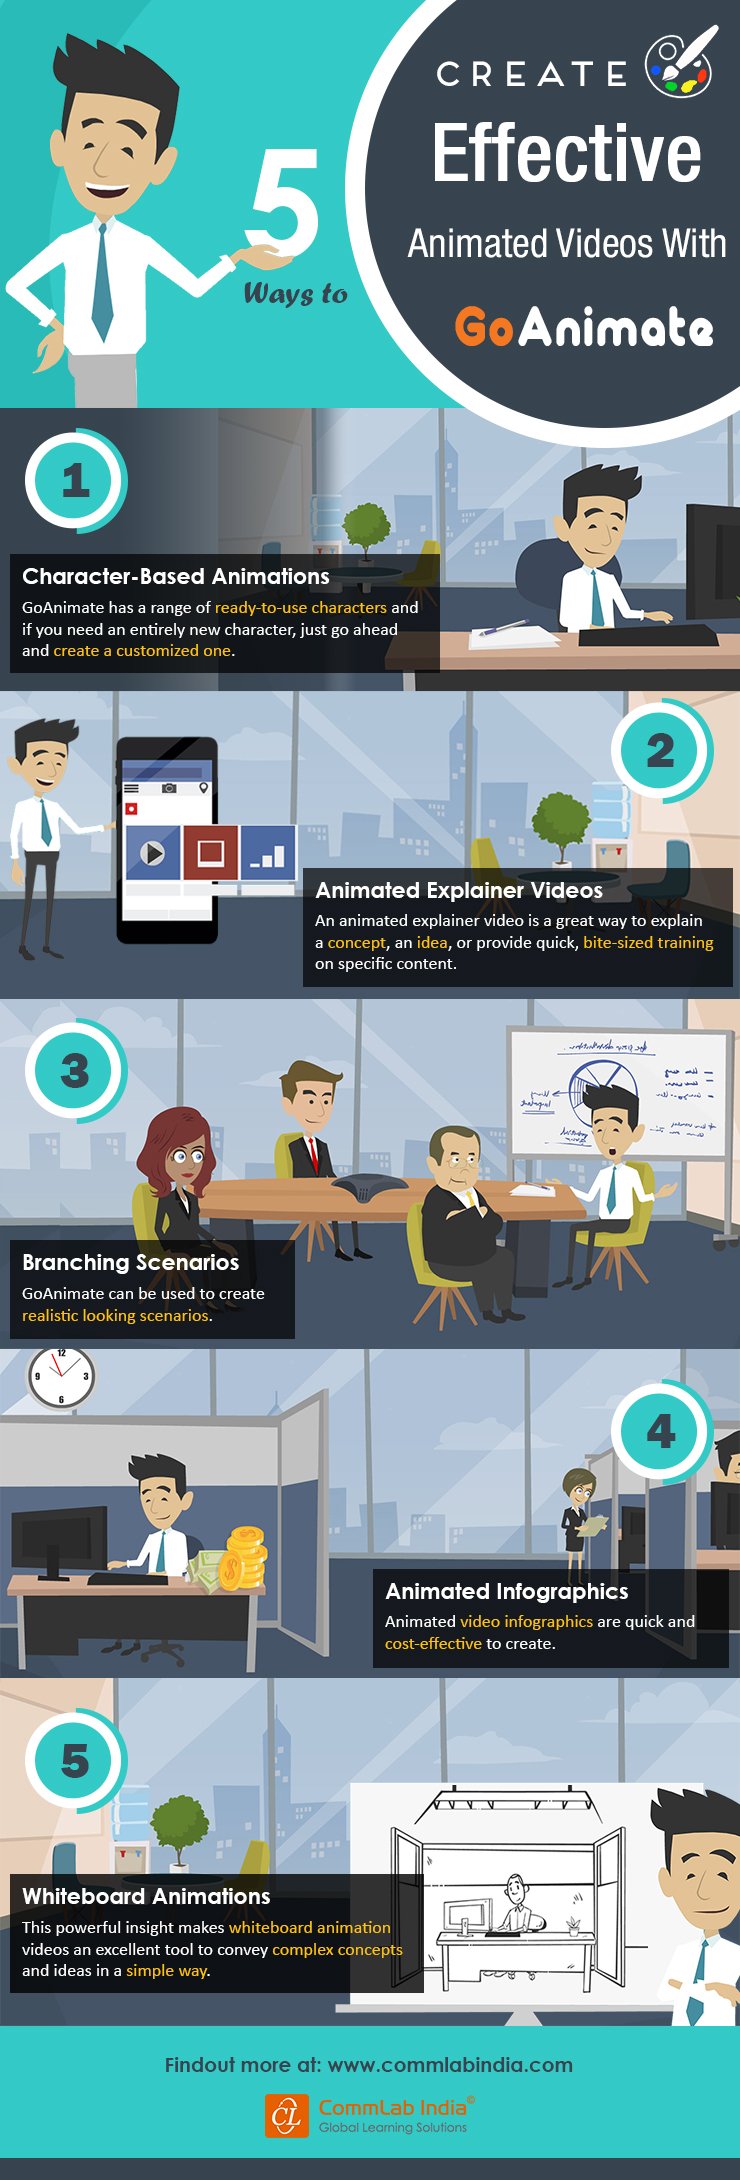 5 Ways to Create Effective Animated Videos with GoAnimate [Infographic]